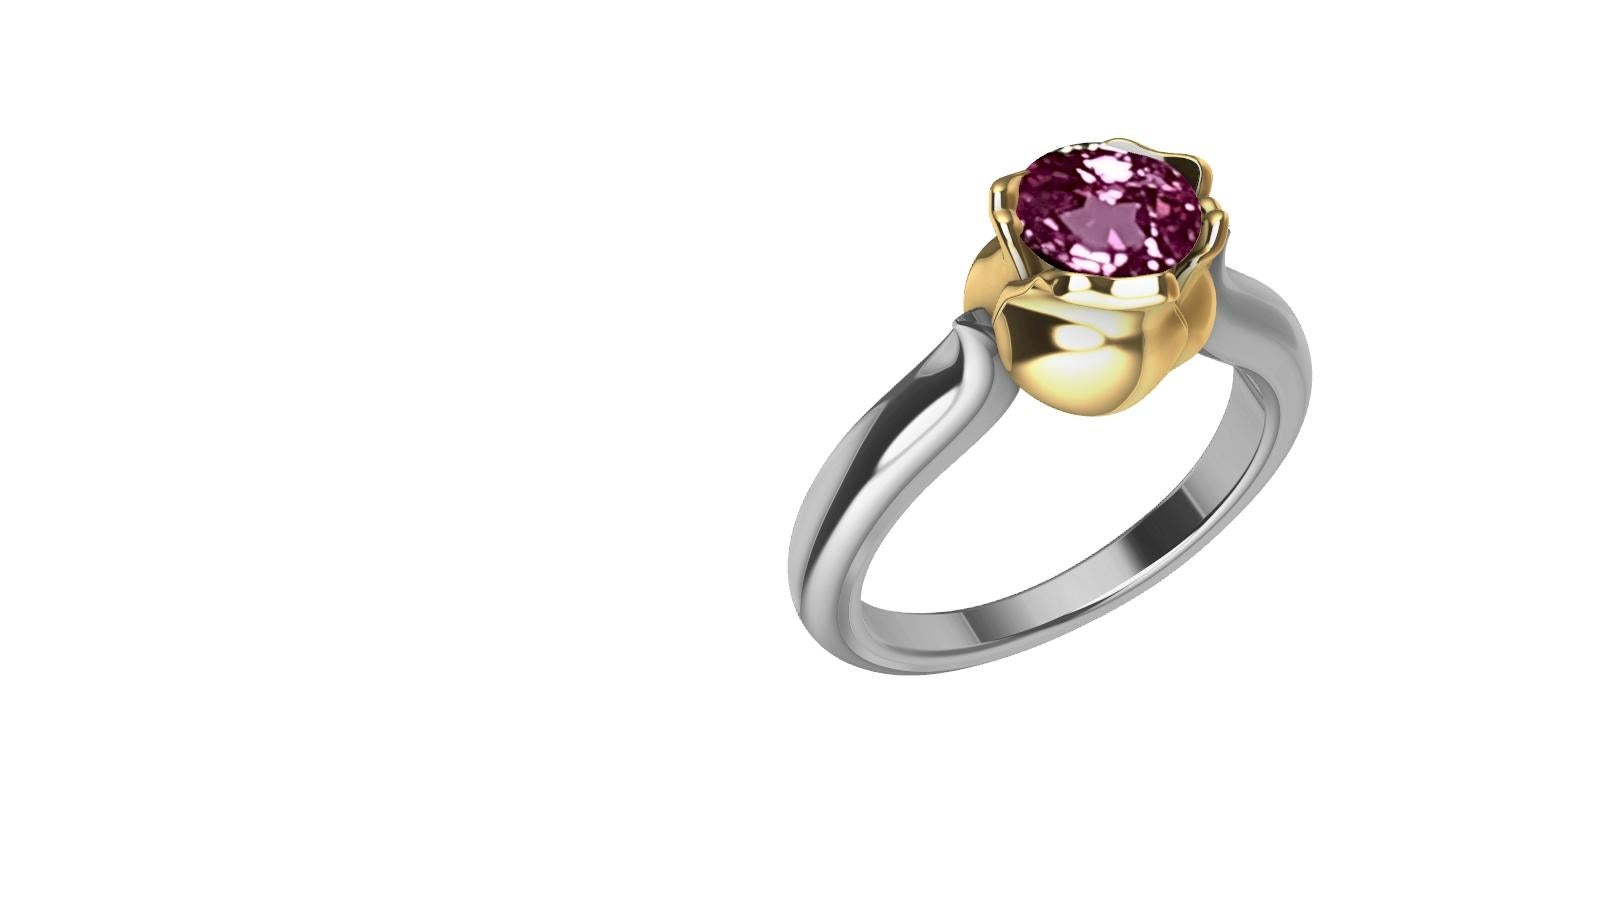 For Sale:  18 Karat Yellow Gold and Platinum Ceritfied Pink Sapphire 1.18 Carat Tulip Ring 3